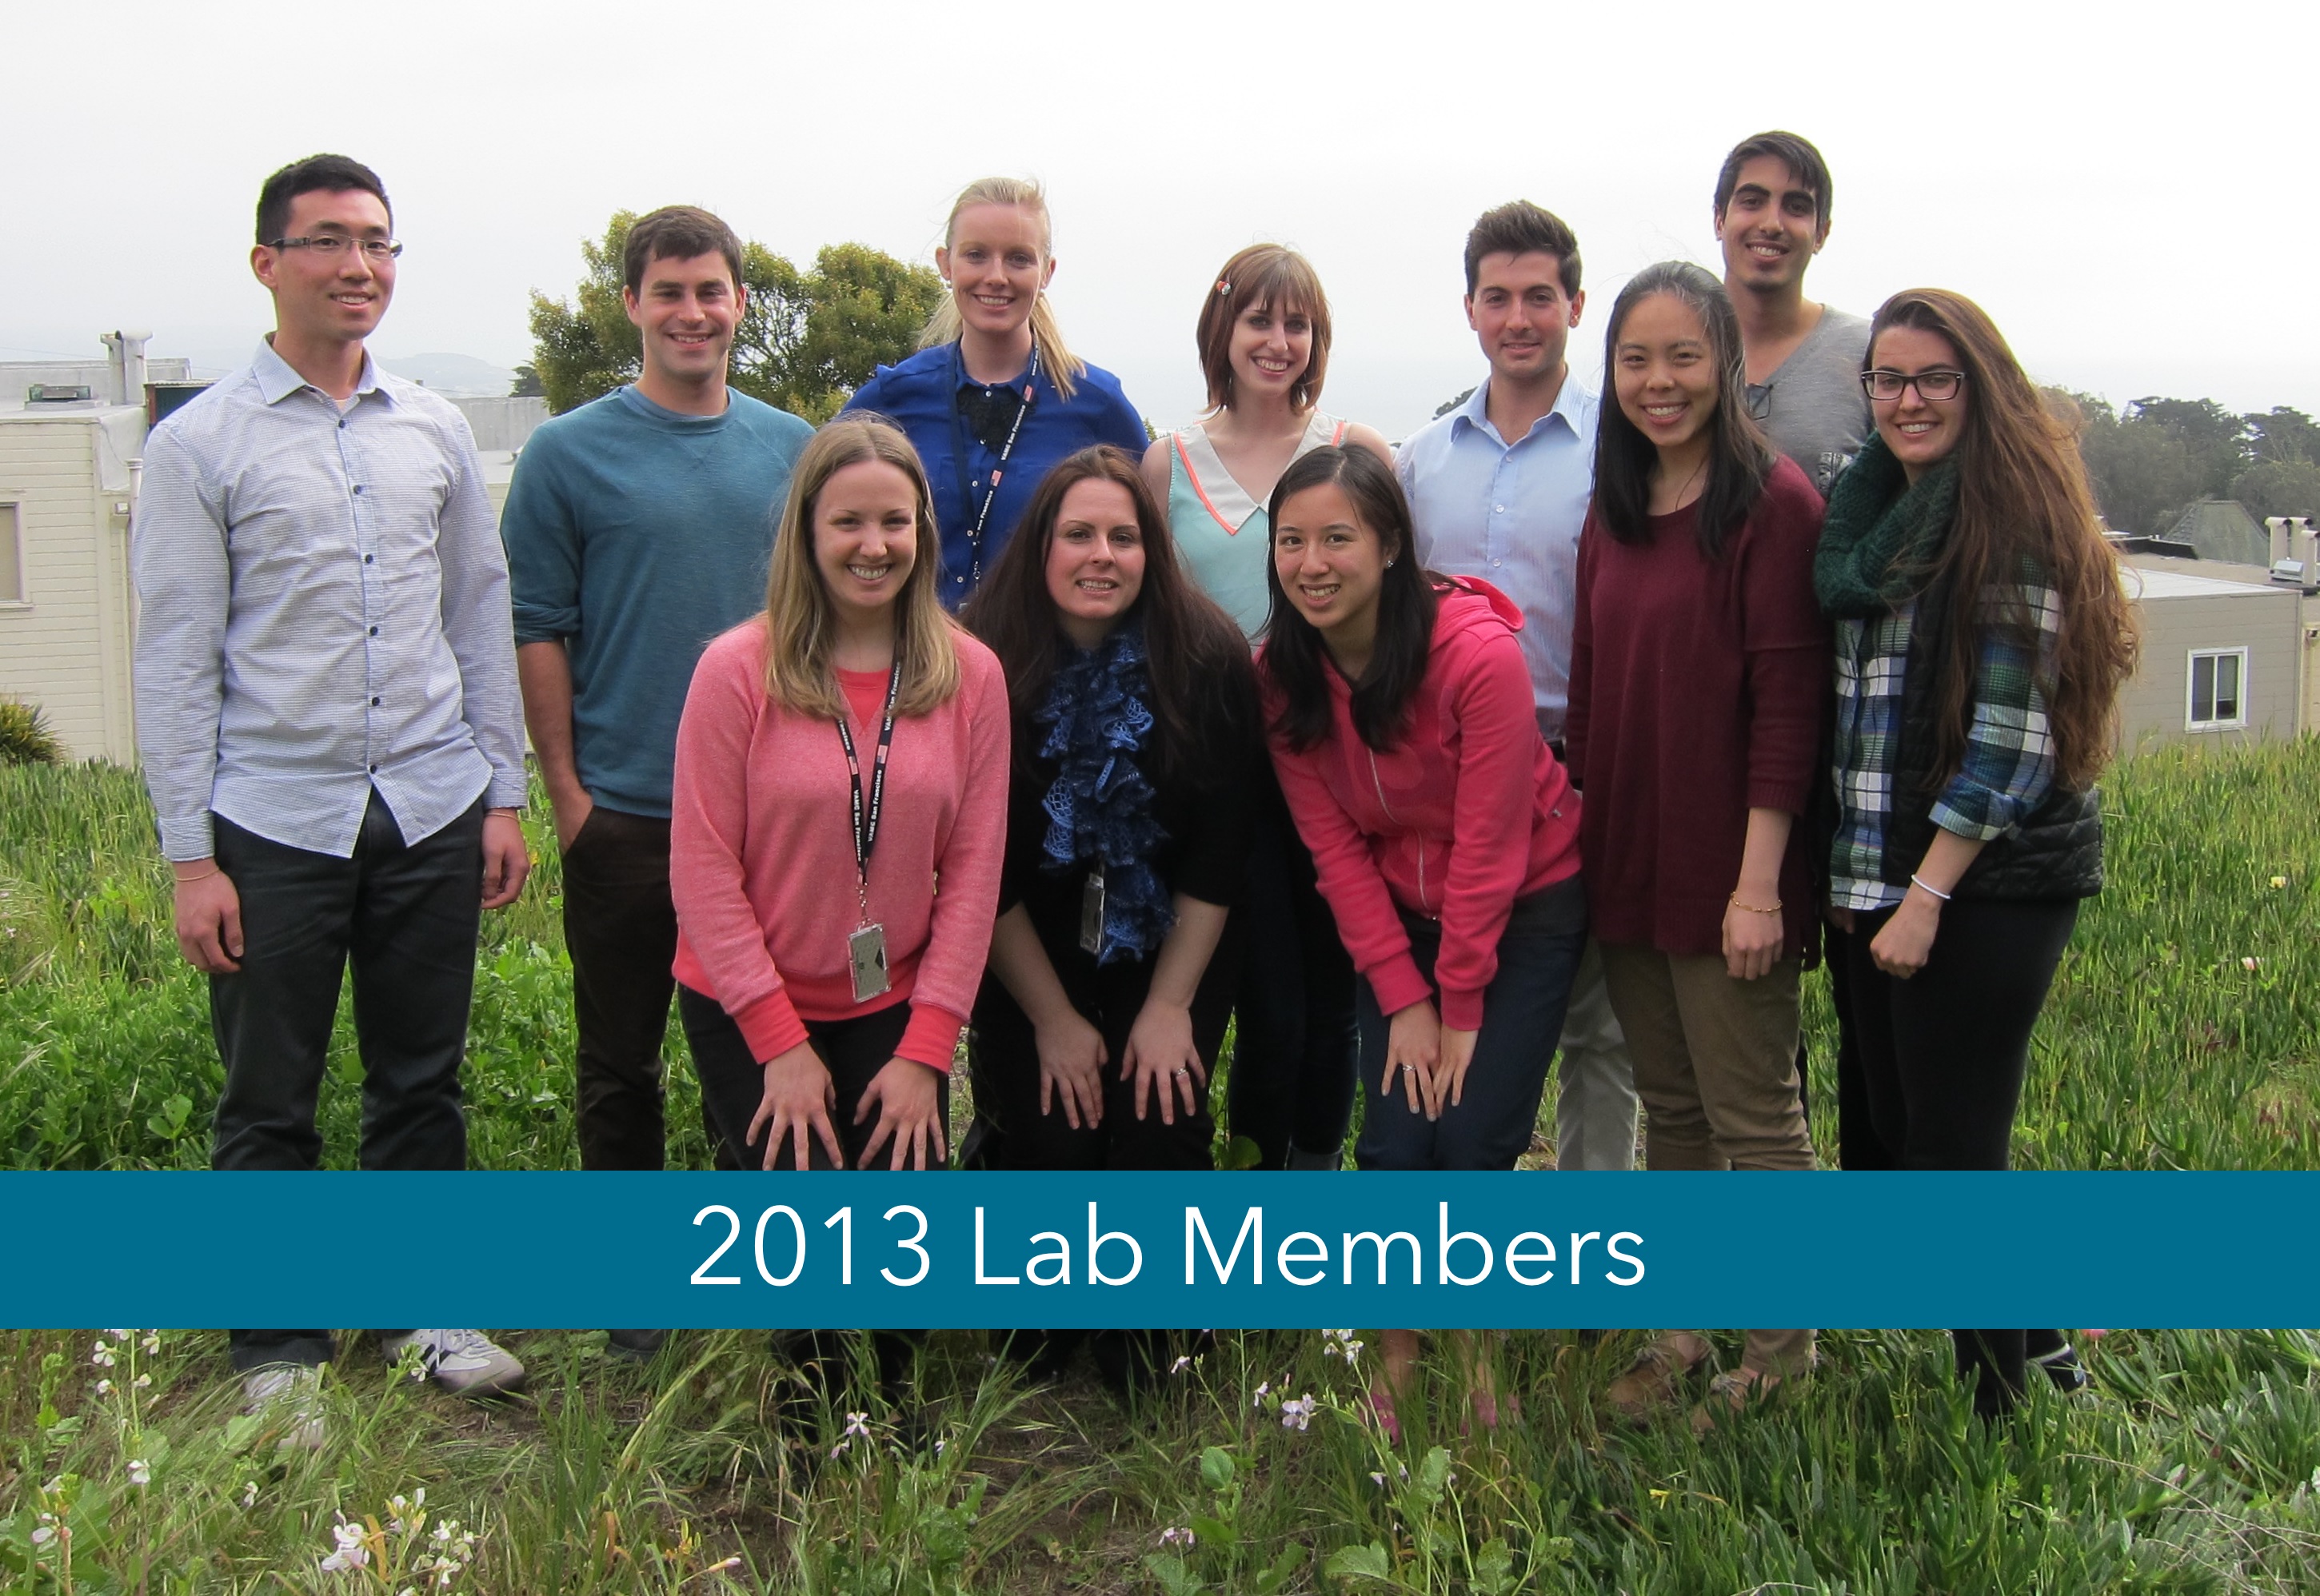 Lab Members from 2013